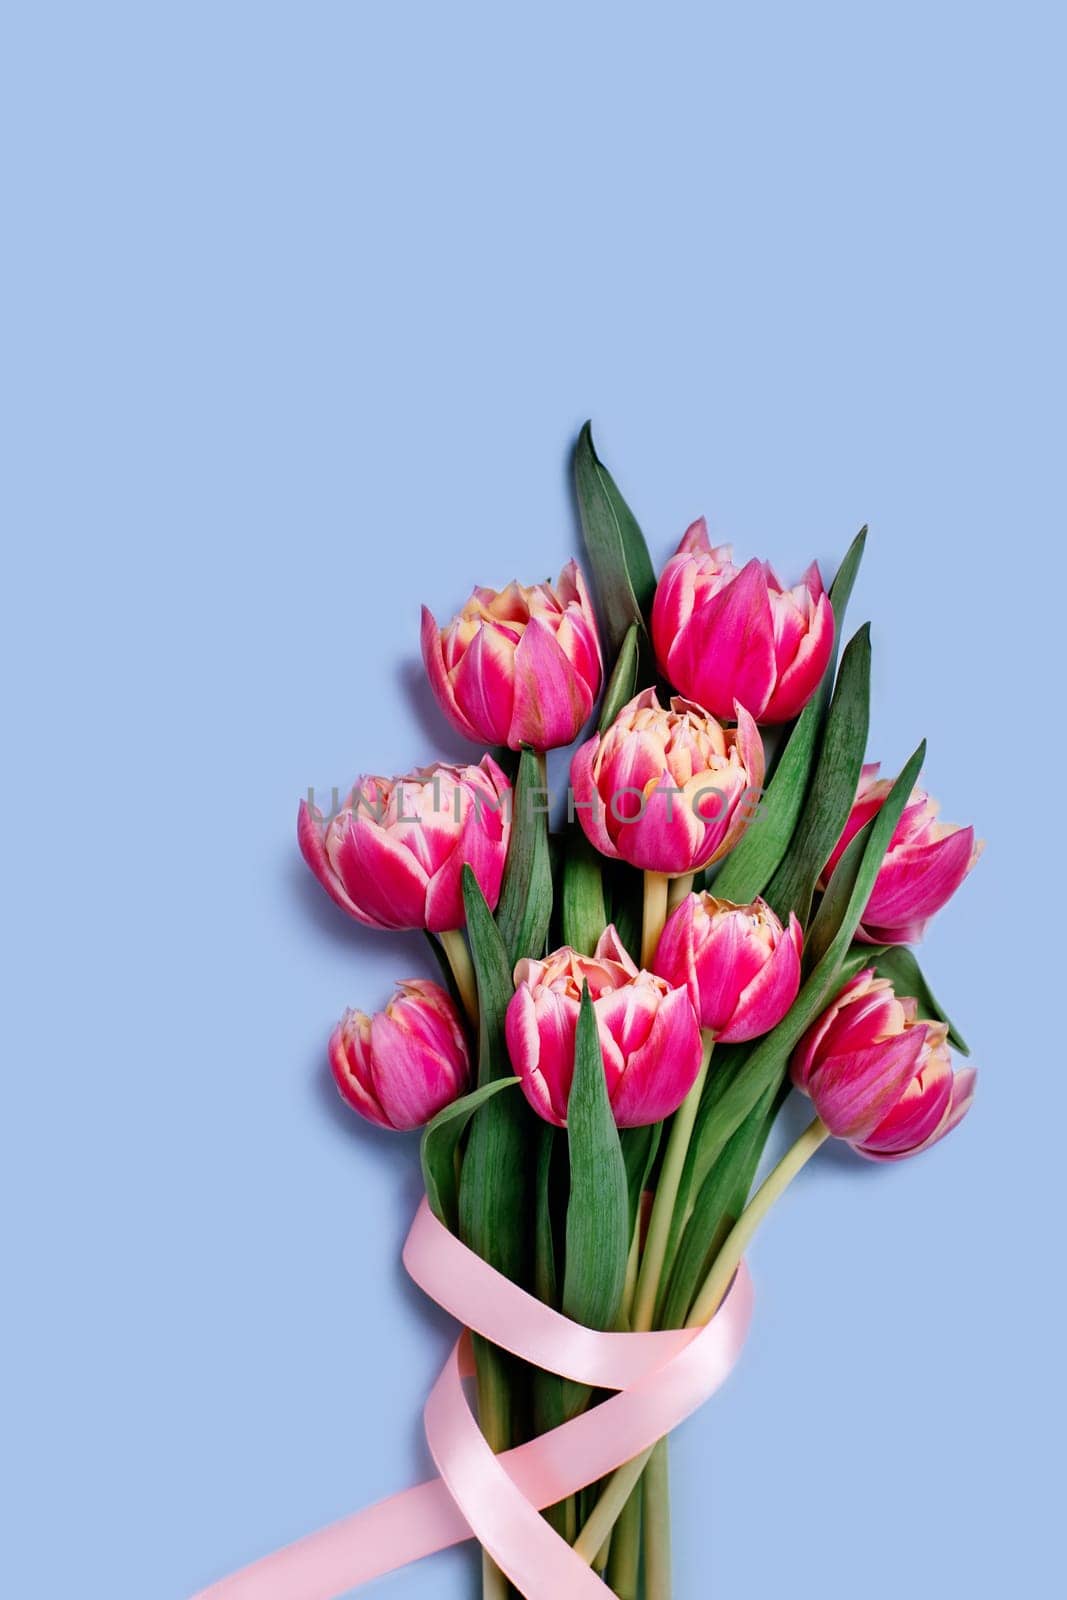 Greeting card with bouquet of tulips decorated with a pink ribbon on blue background, place for your text. Vertical picture.